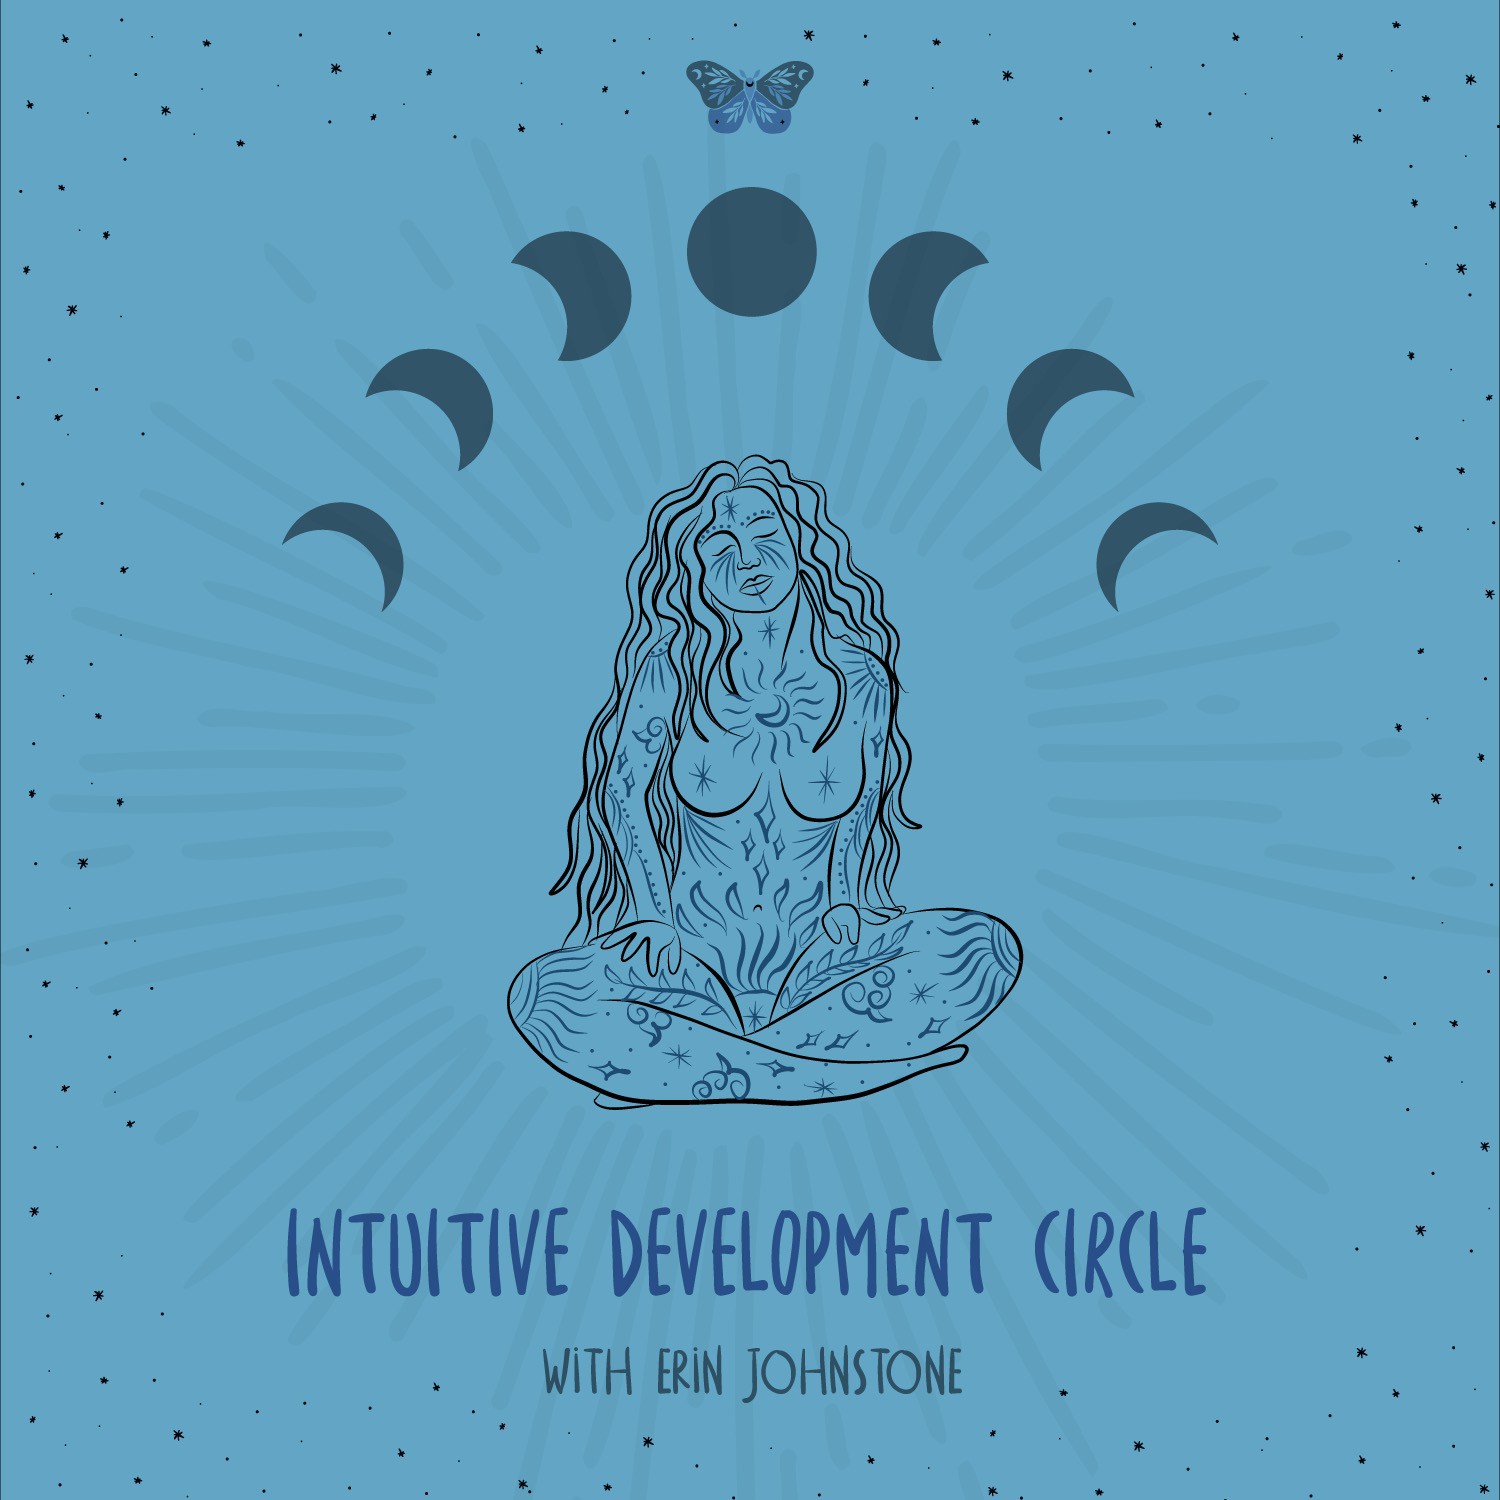 Intuitive Development Circle with Erin Johnstone